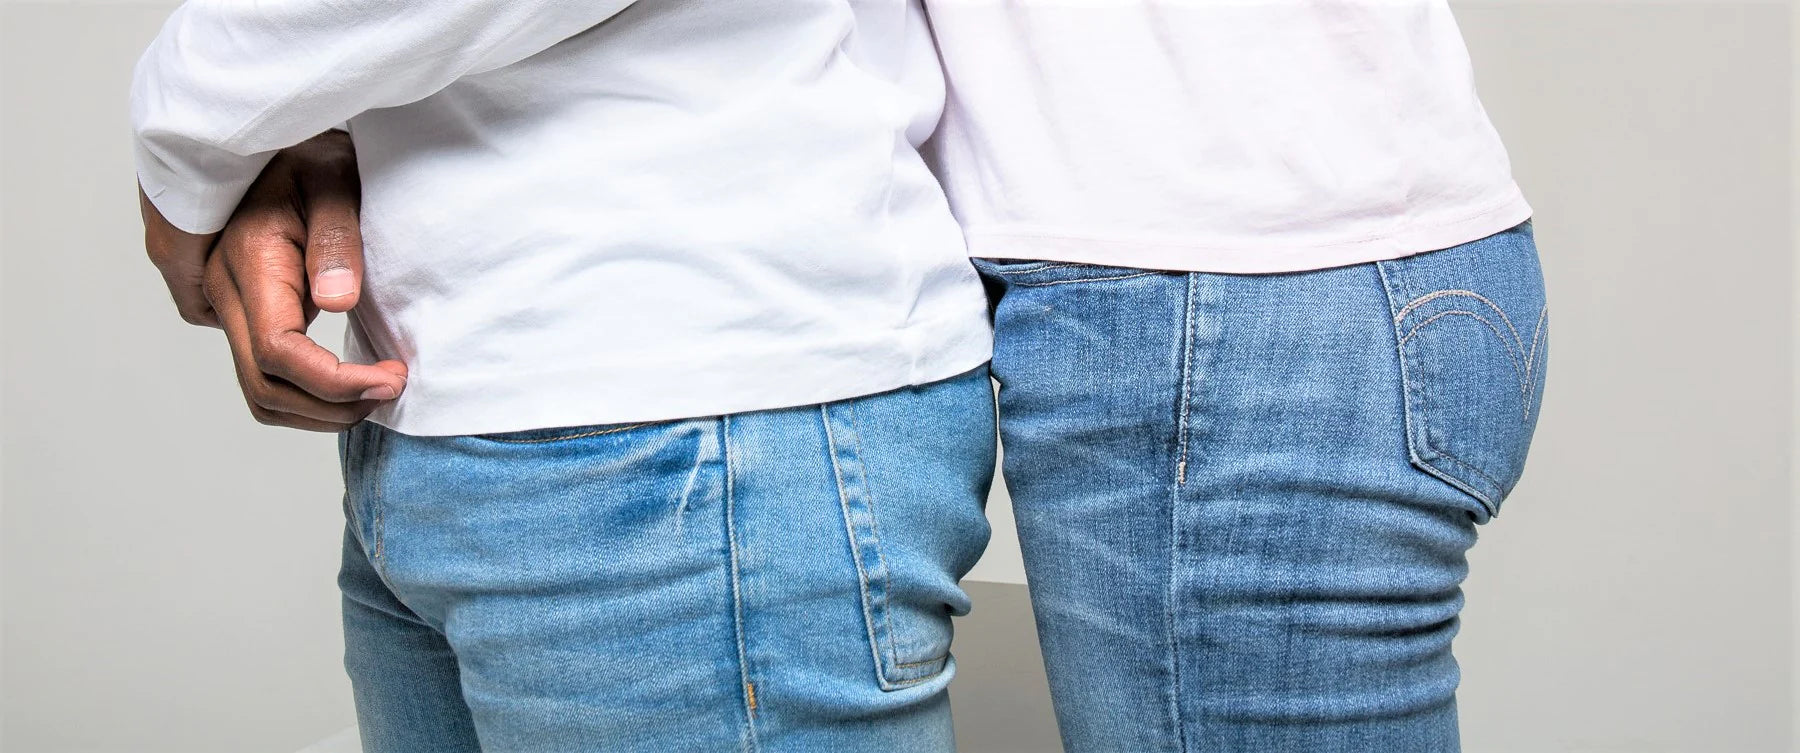 Here Is Why Women's Jeans Don't Have Pockets Like Men's. There Is